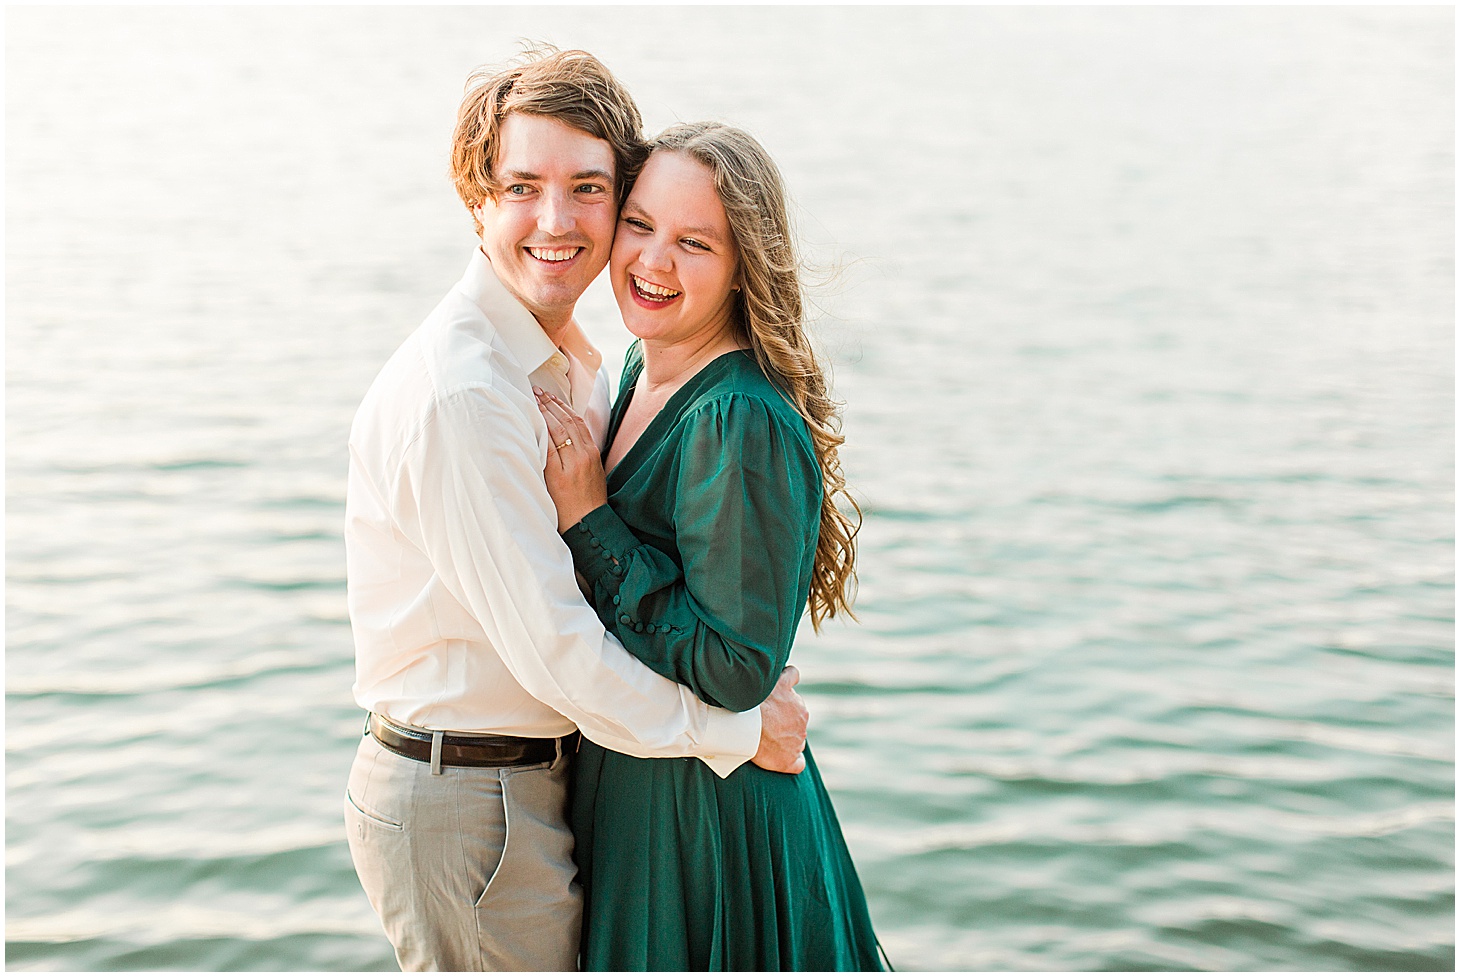 carvinscoveengagementsession_roanokeengagementsession_carvinscove_virginiawedding_virginiaweddingphotographer_vaweddingphotographer_photo_0040.jpg